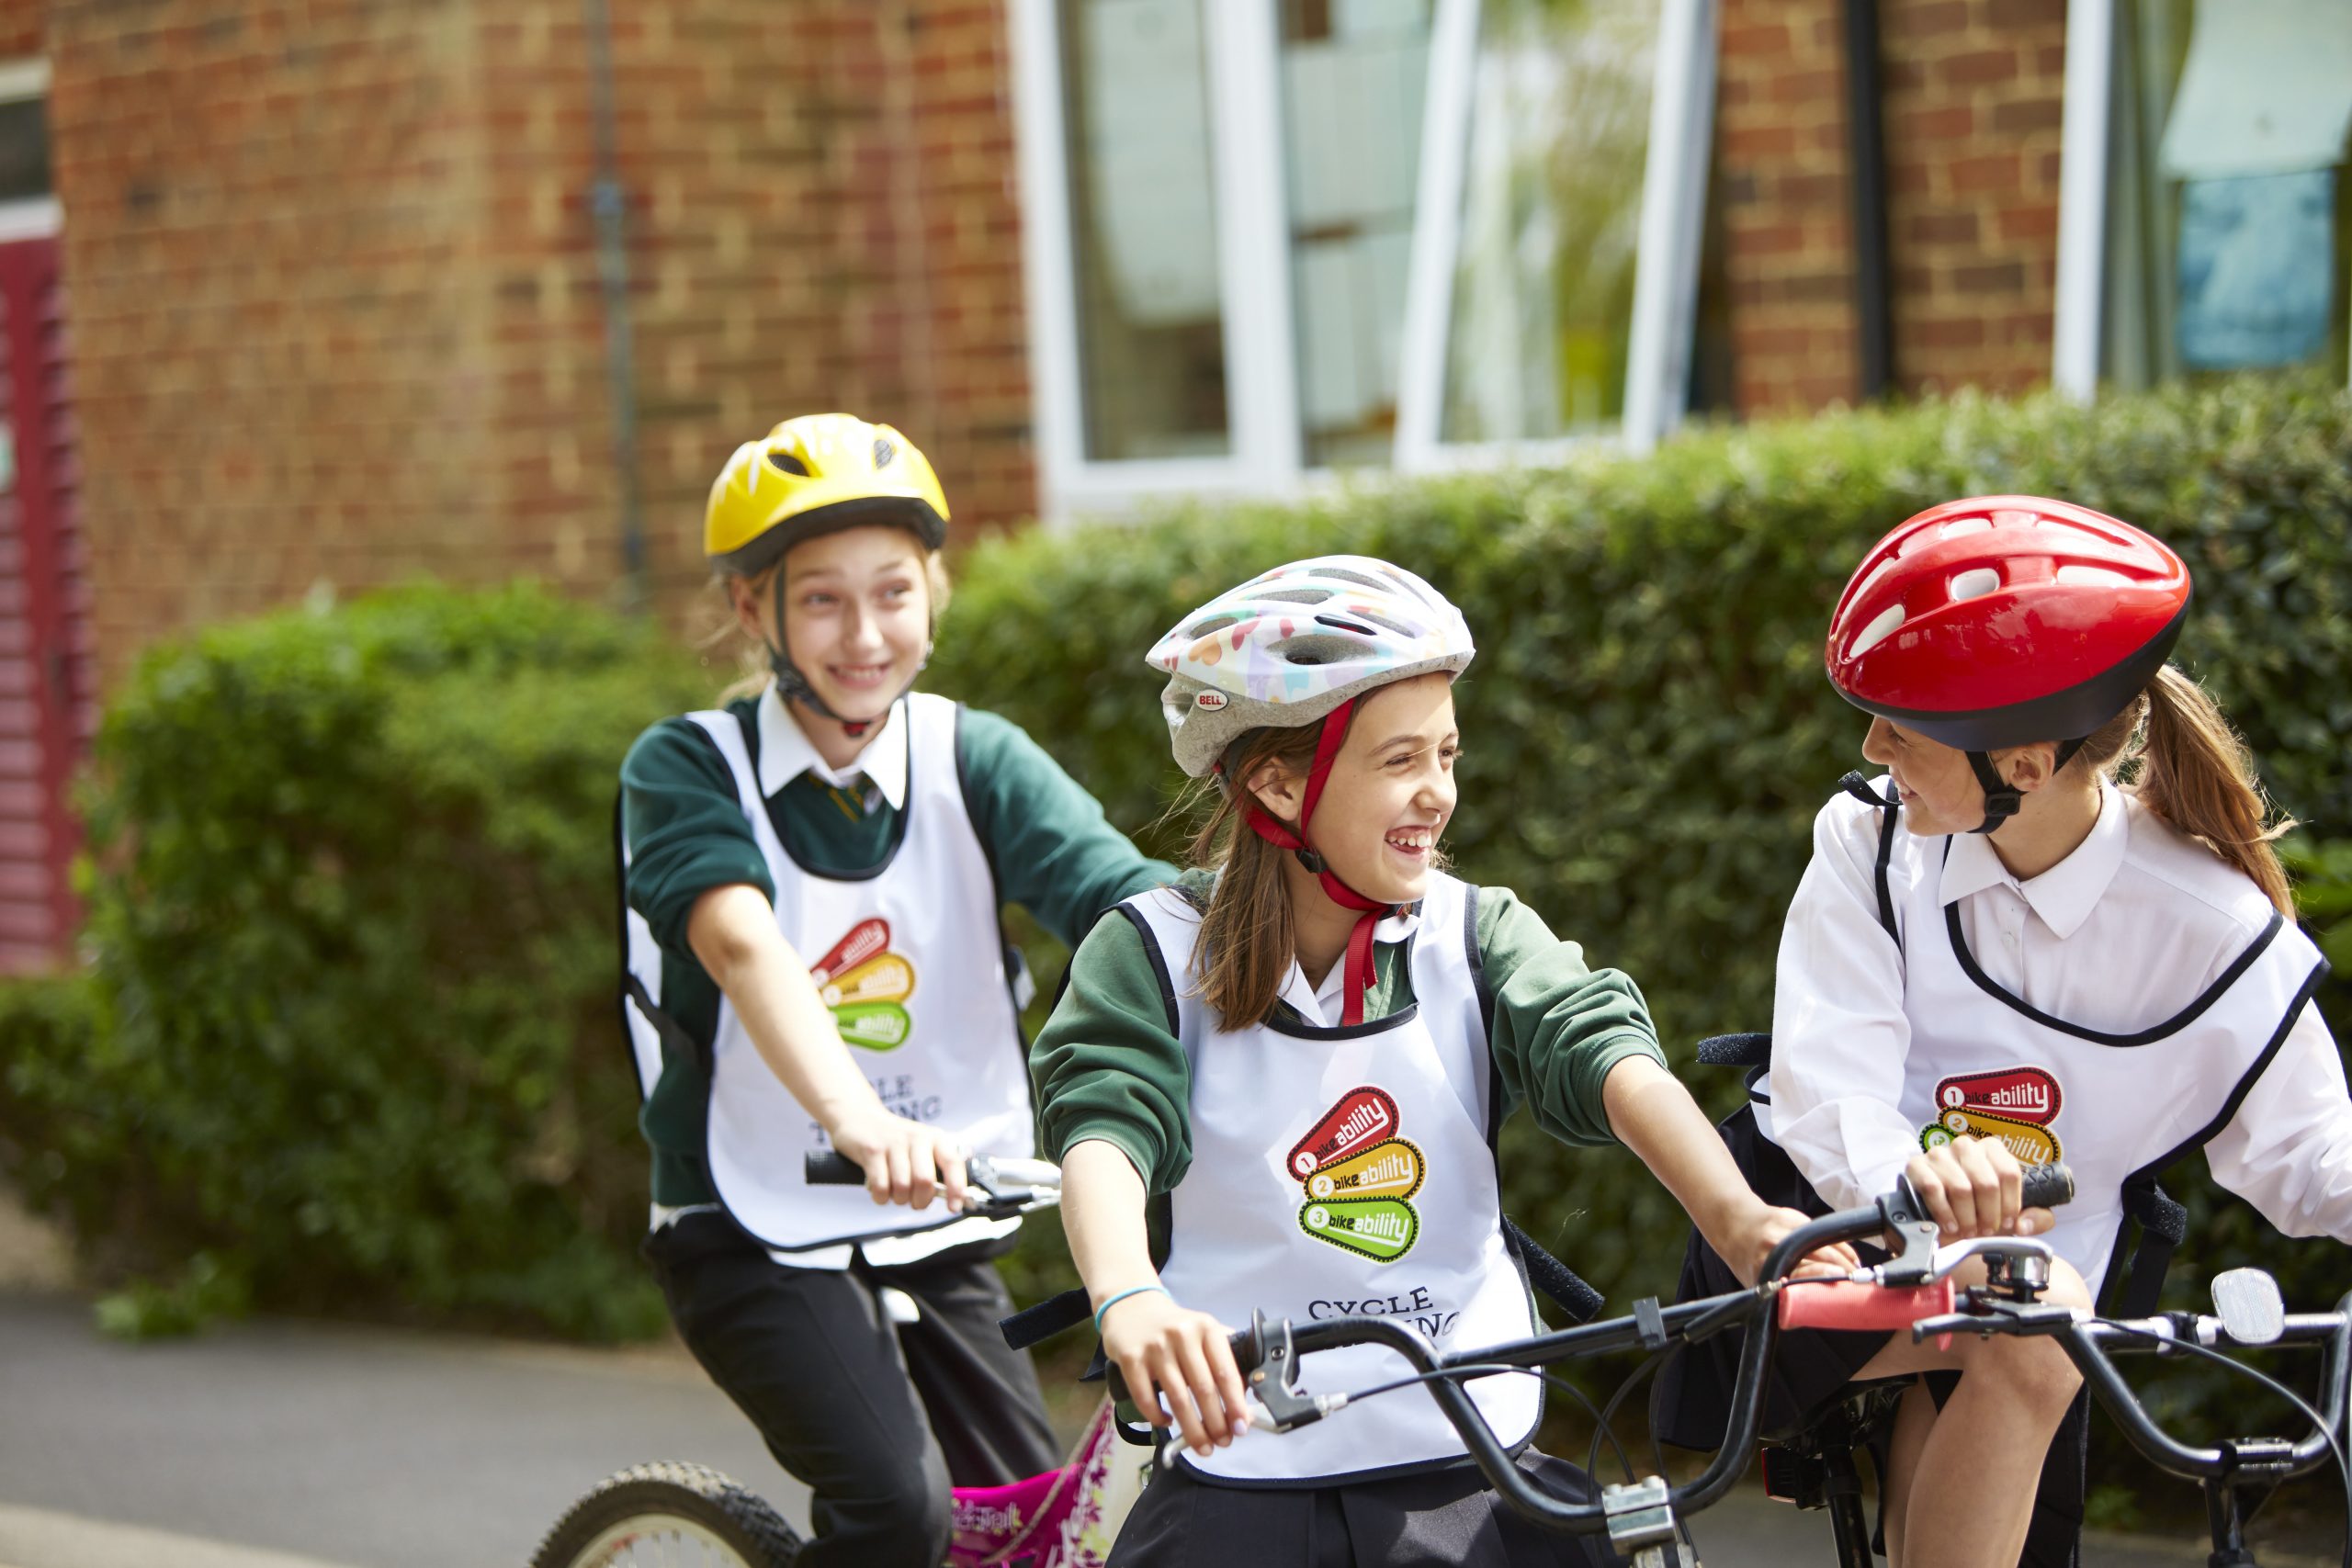 Three girls on cycles and wearing helmets smile at each other. They are stood in front of a building and hedge.